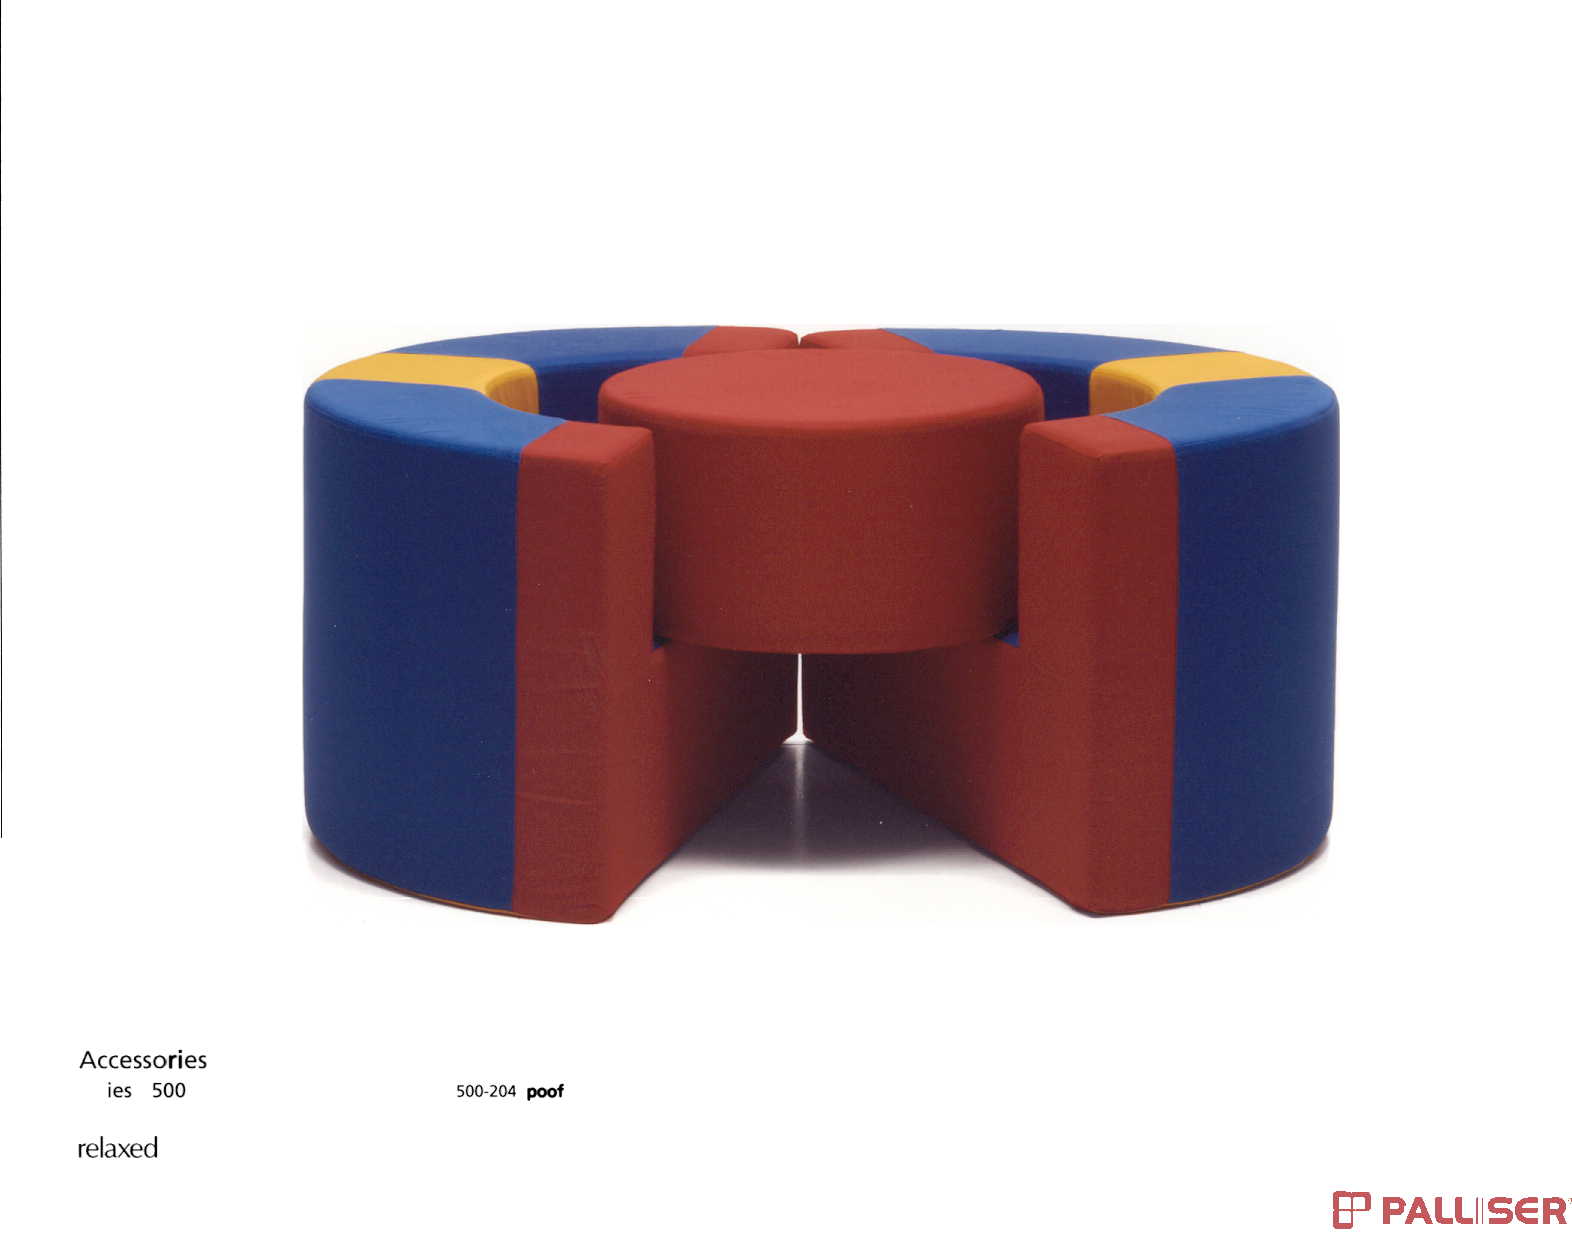 picture of recalled poof chair set